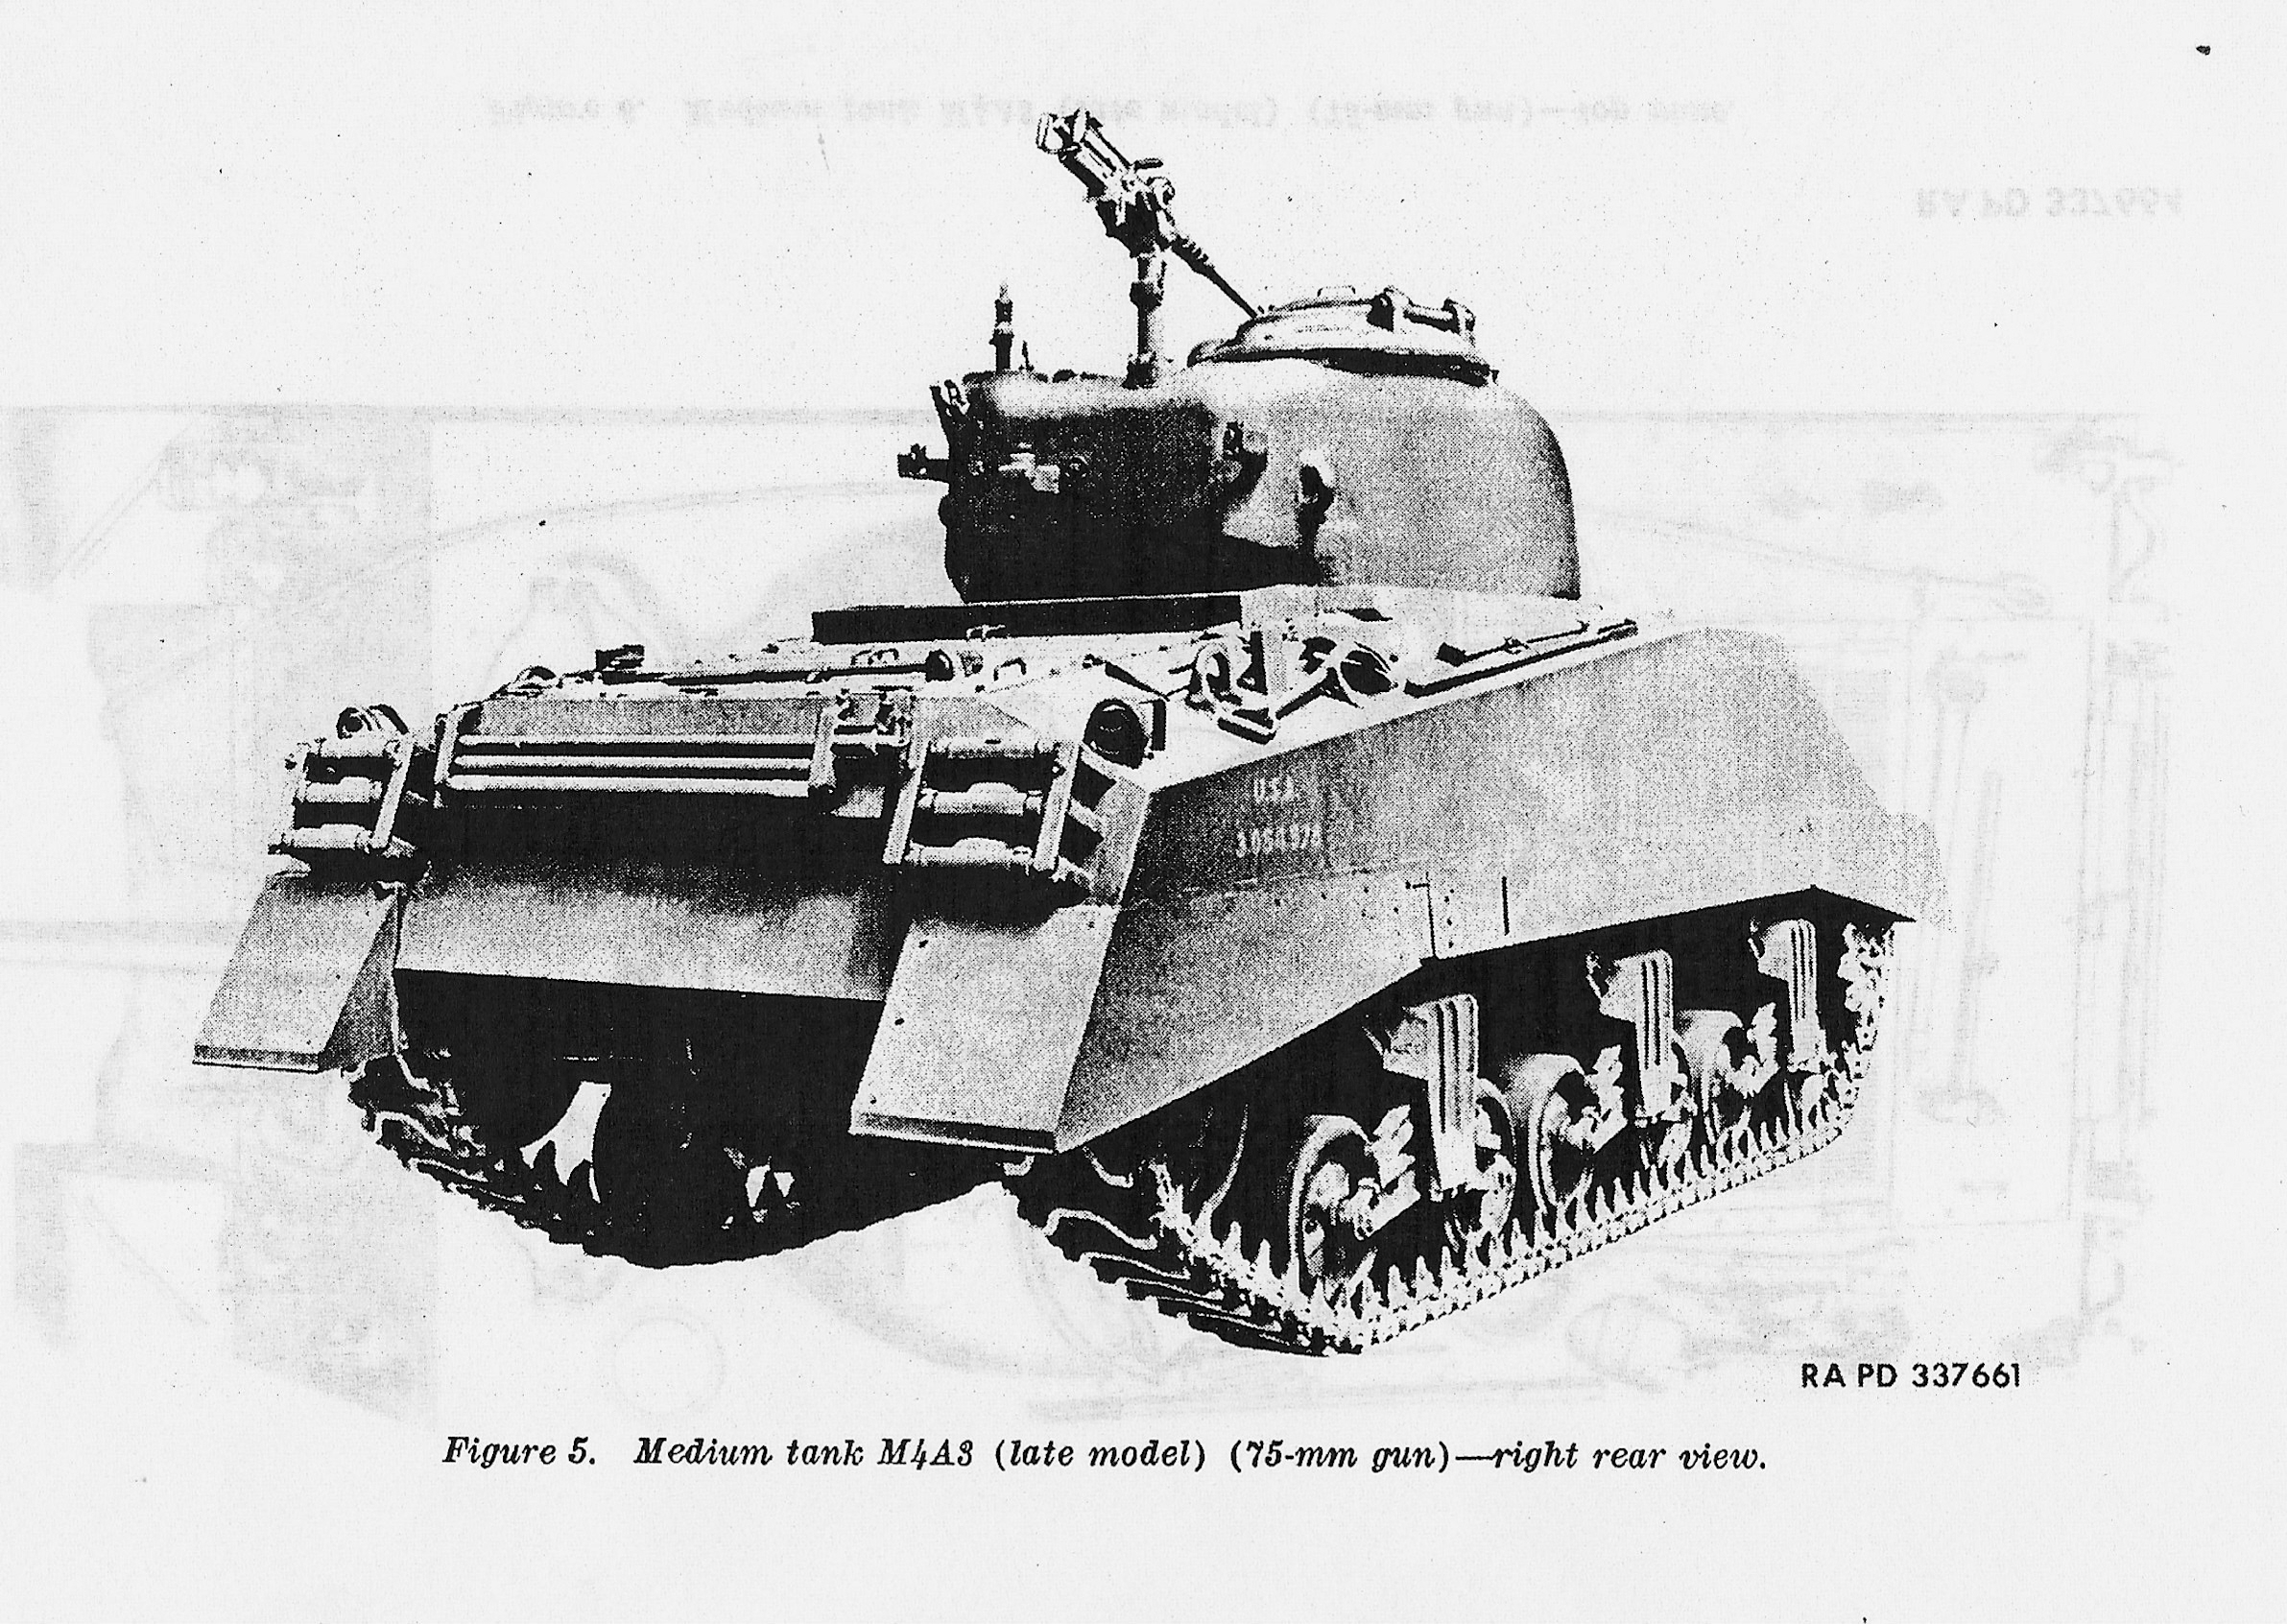 The Sherman M4A1 Medium Tank: First and Last Produced.